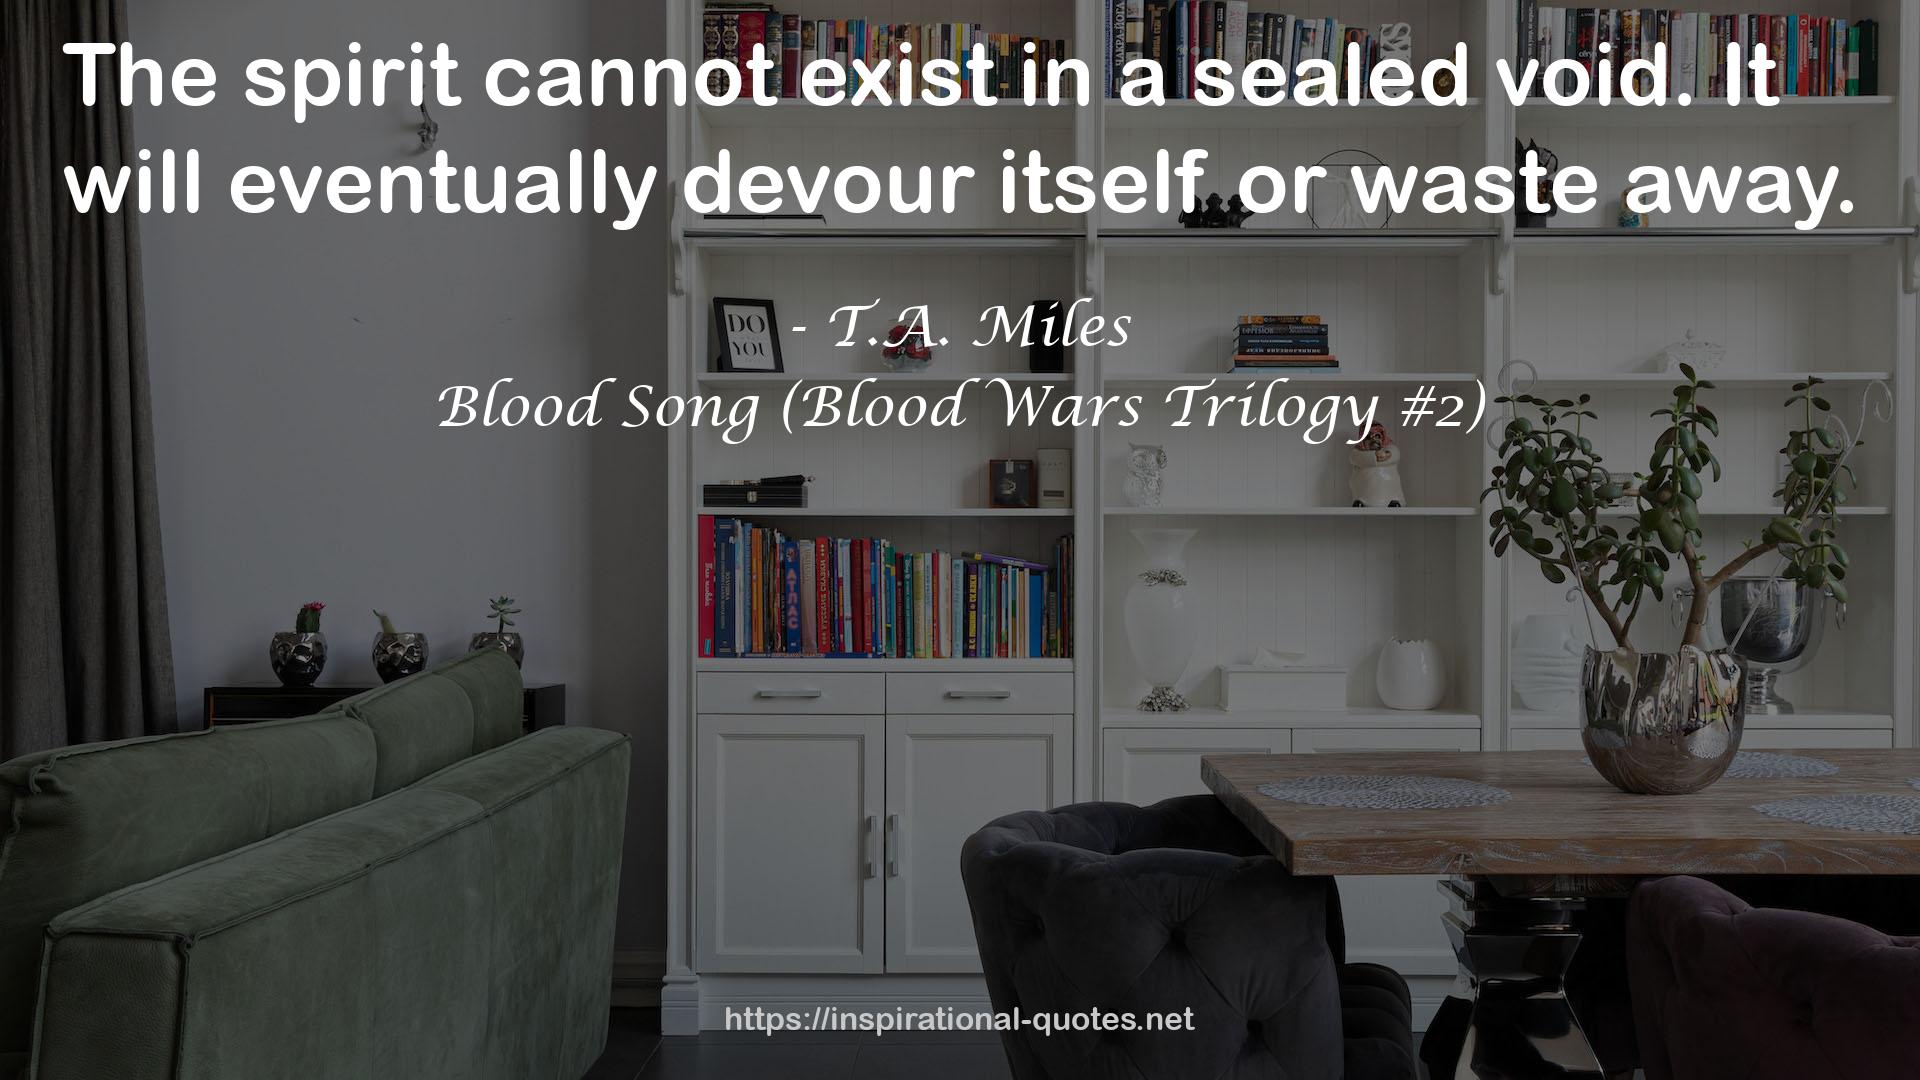 Blood Song (Blood Wars Trilogy #2) QUOTES